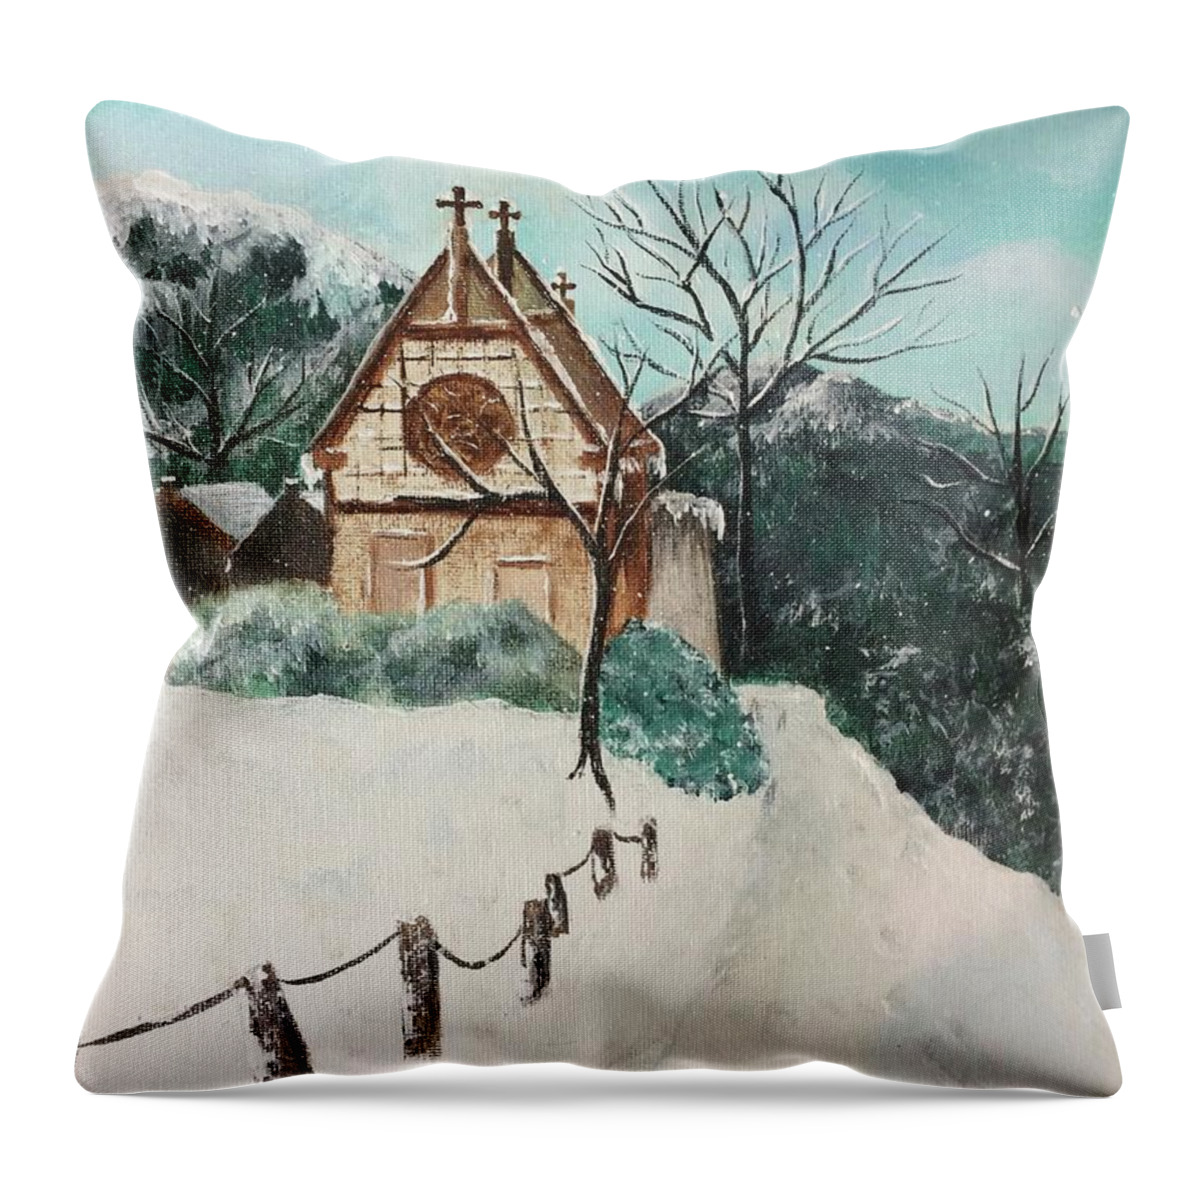 Church Throw Pillow featuring the painting Snowy Daze by Denise Tomasura